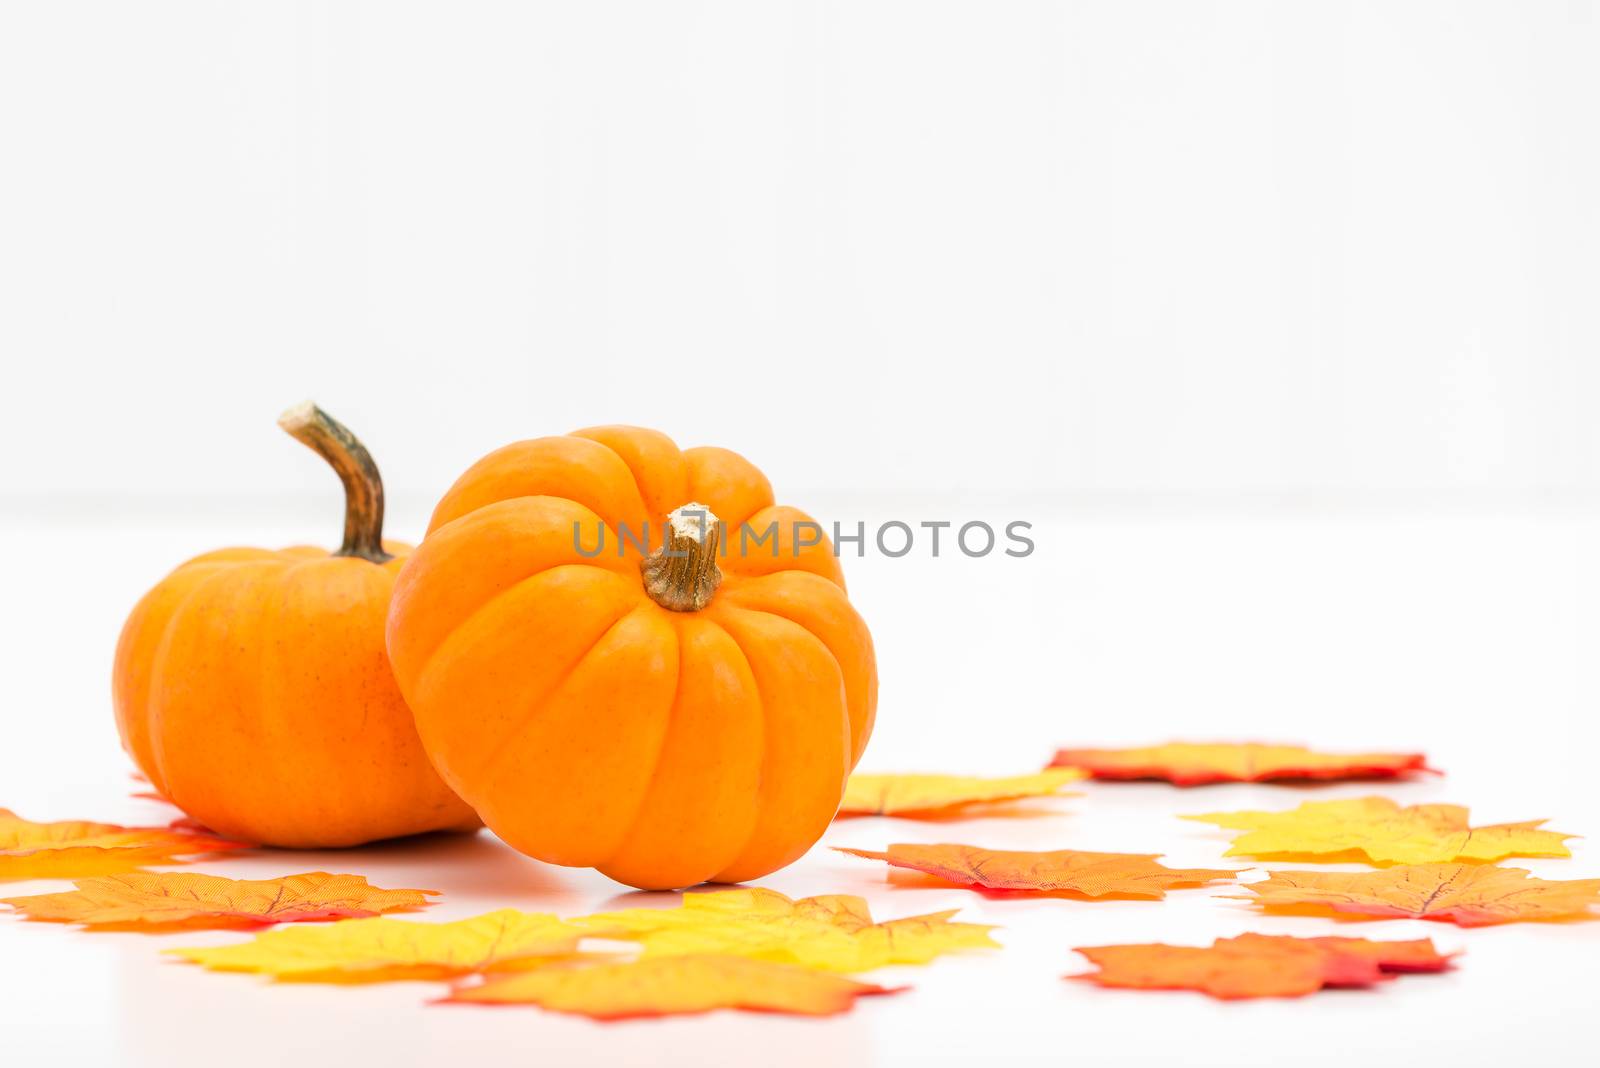 Two ripe pumpkins among colorful autumn leaves.